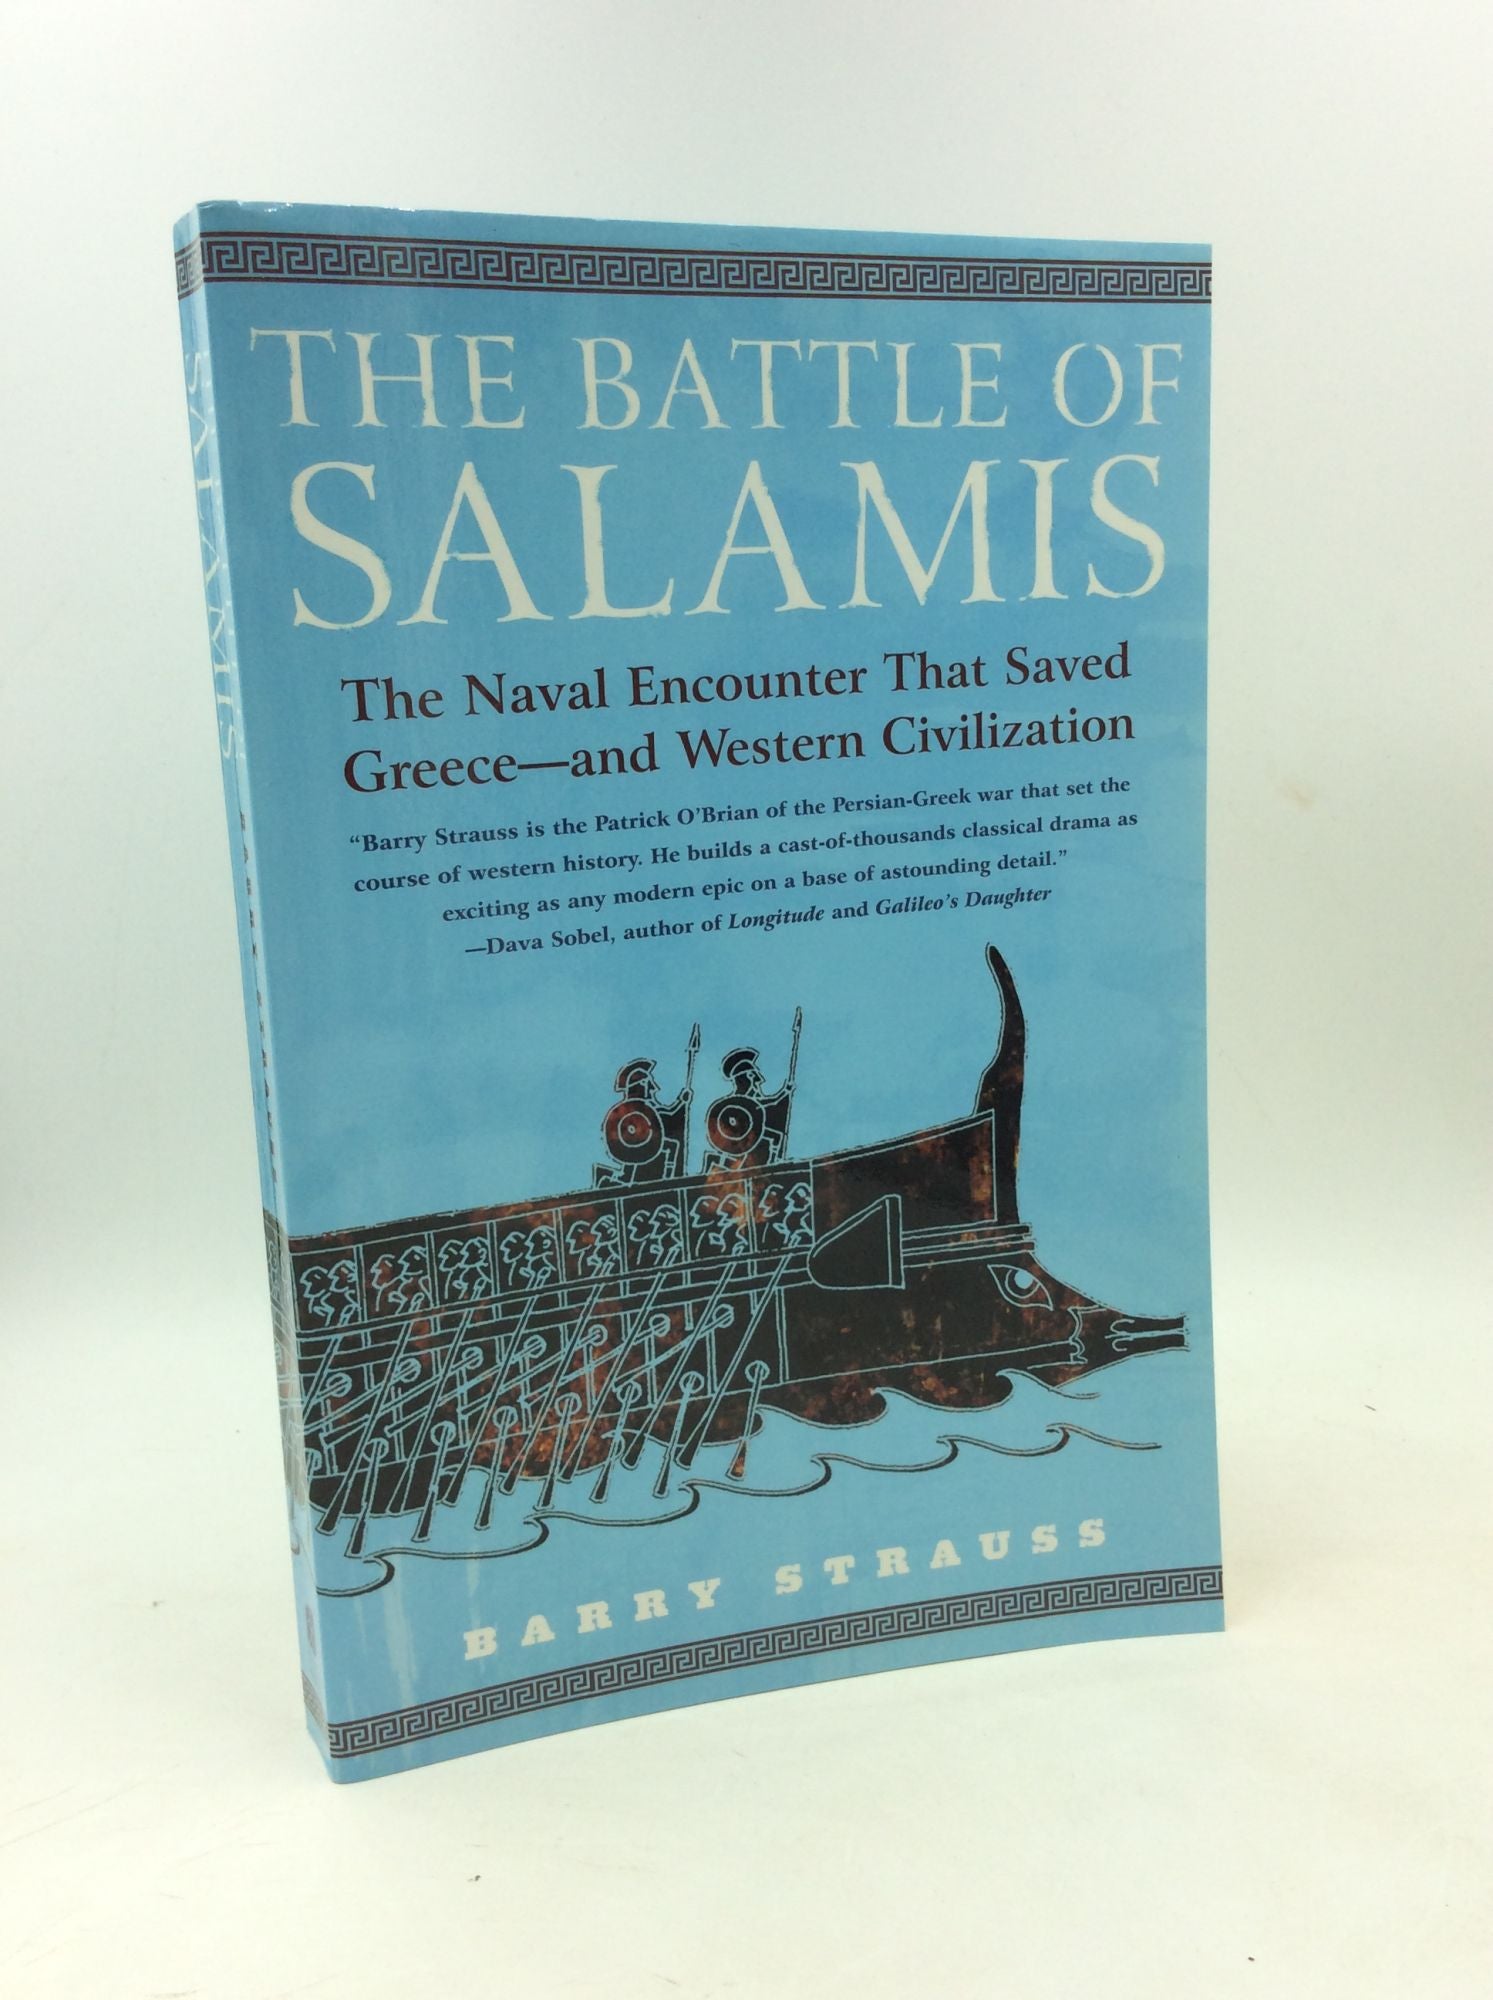 Barry Strauss - The Battle of Salamis: The Naval Encounter That Saved Greece--and Western Civilization